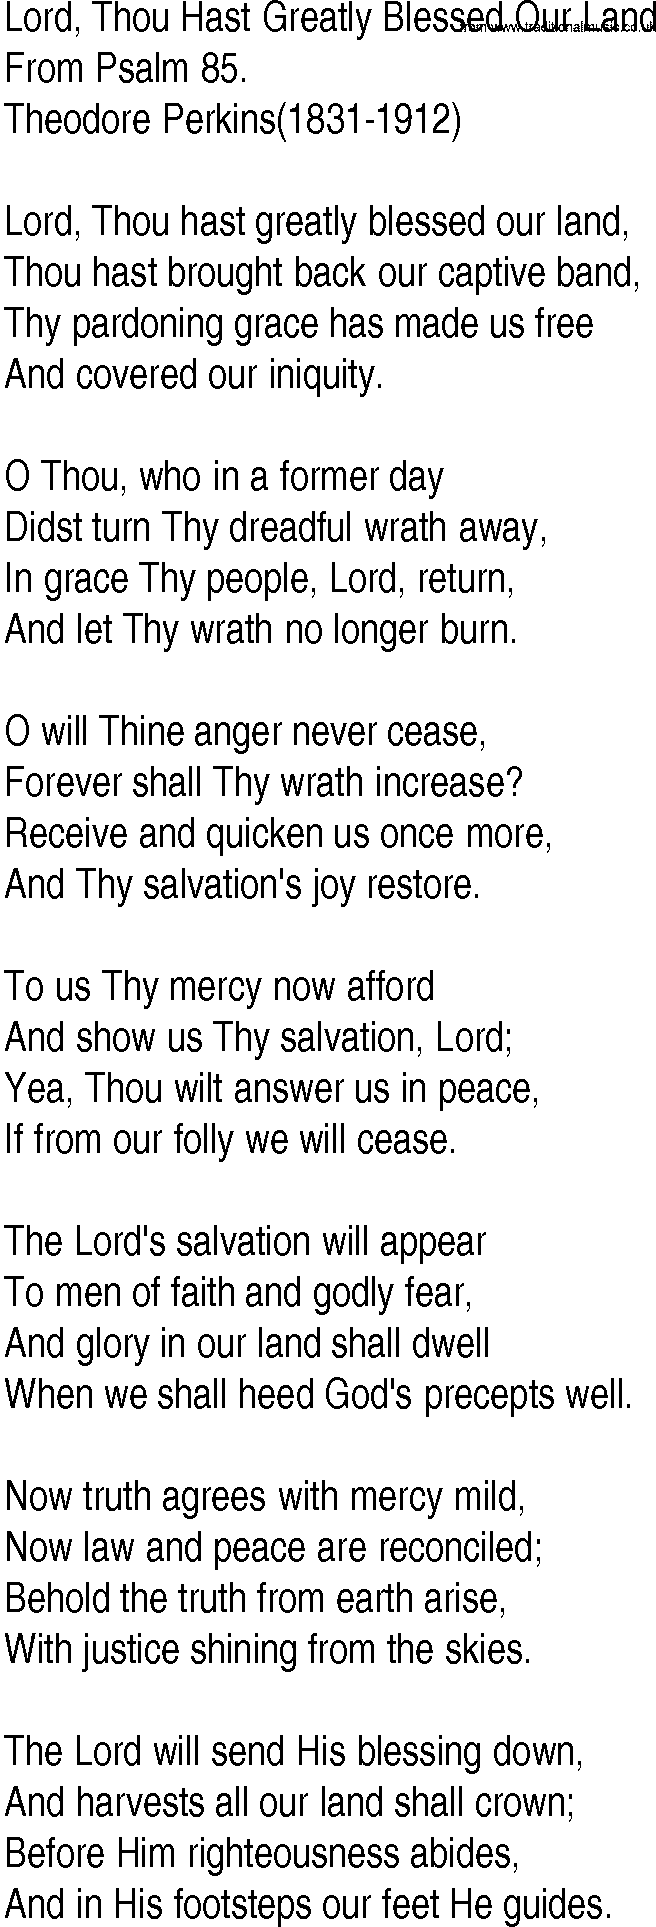 Hymn and Gospel Song: Lord, Thou Hast Greatly Blessed Our Land by From Psalm lyrics